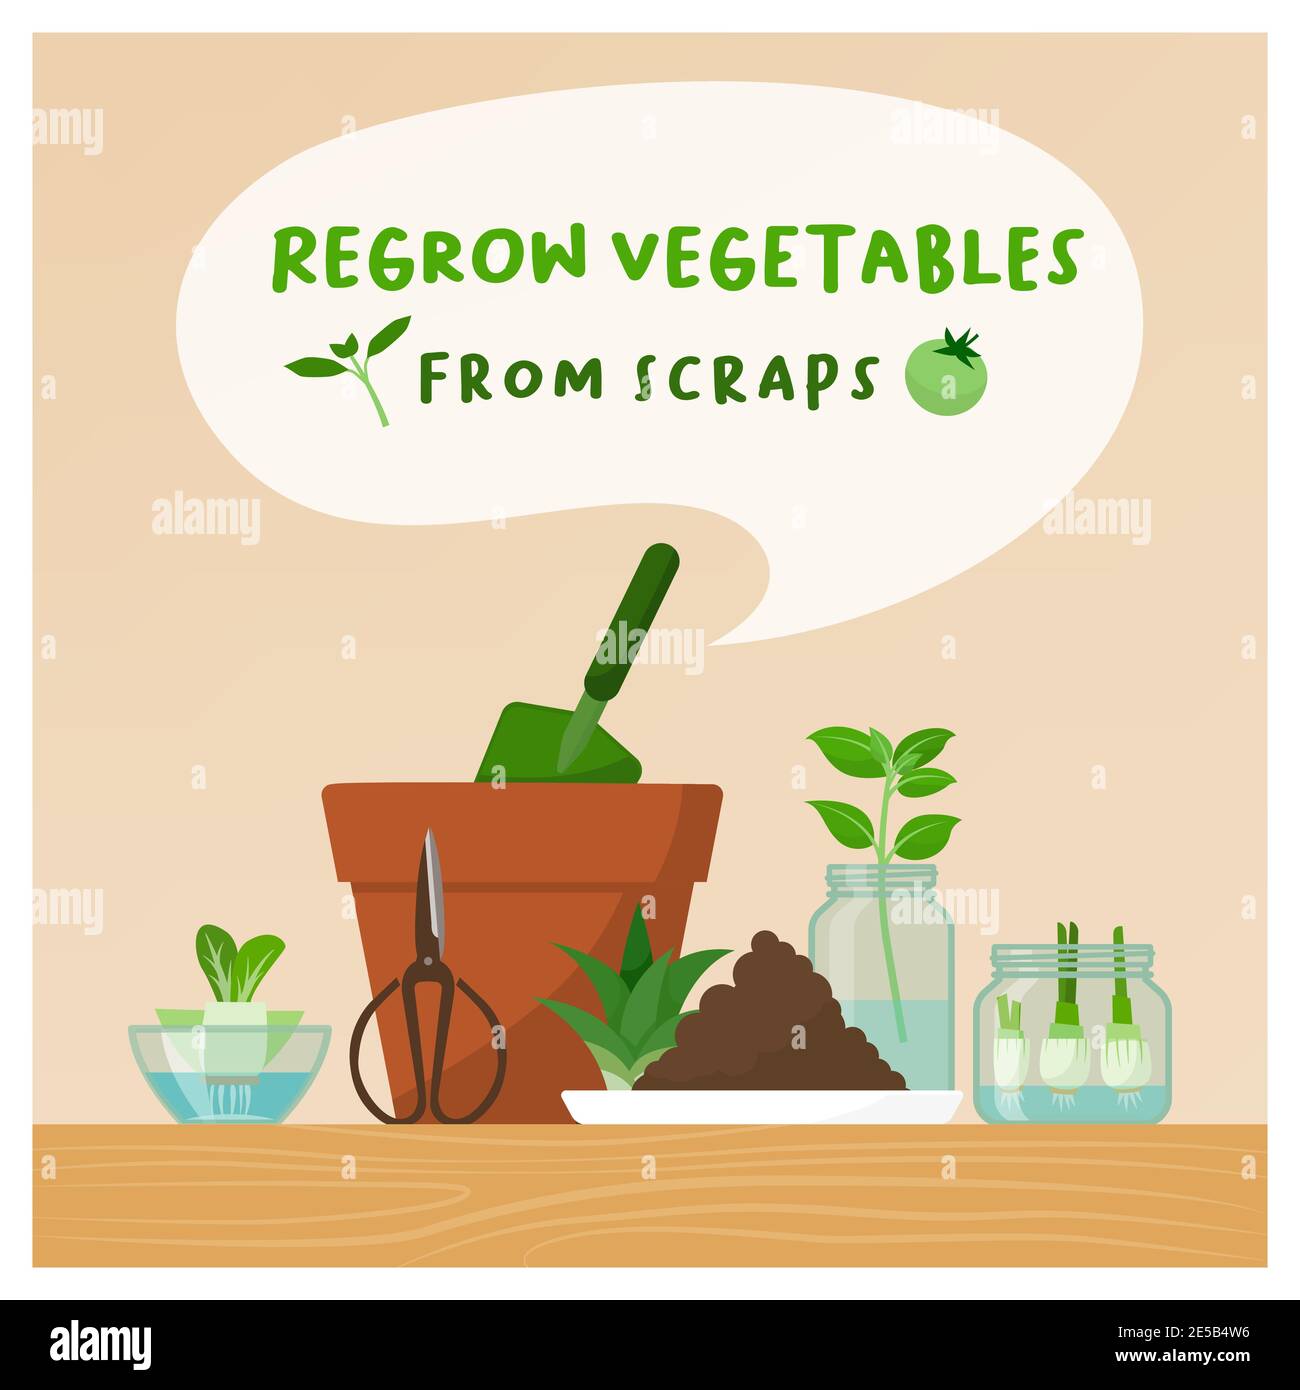 Regrow vegetables from scraps at home: zero waste, DIY gardening and healthy food concept Stock Vector